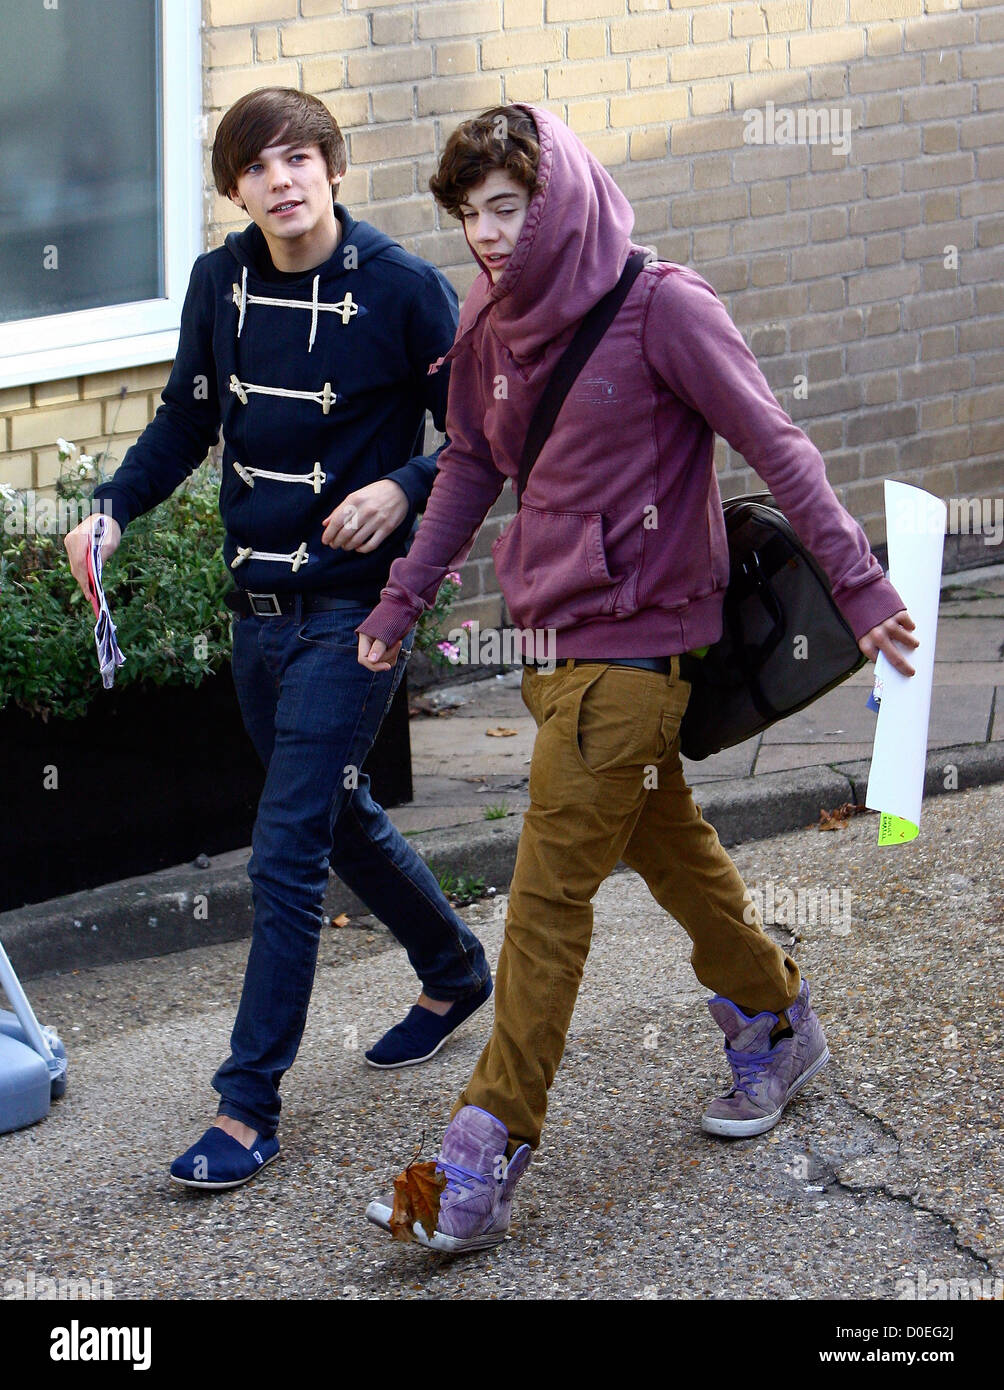 Louis Tomlinson and Harry Styles of One Direction arrive at 'The X Factor'  studios London, England - 07.11.10 Stock Photo - Alamy